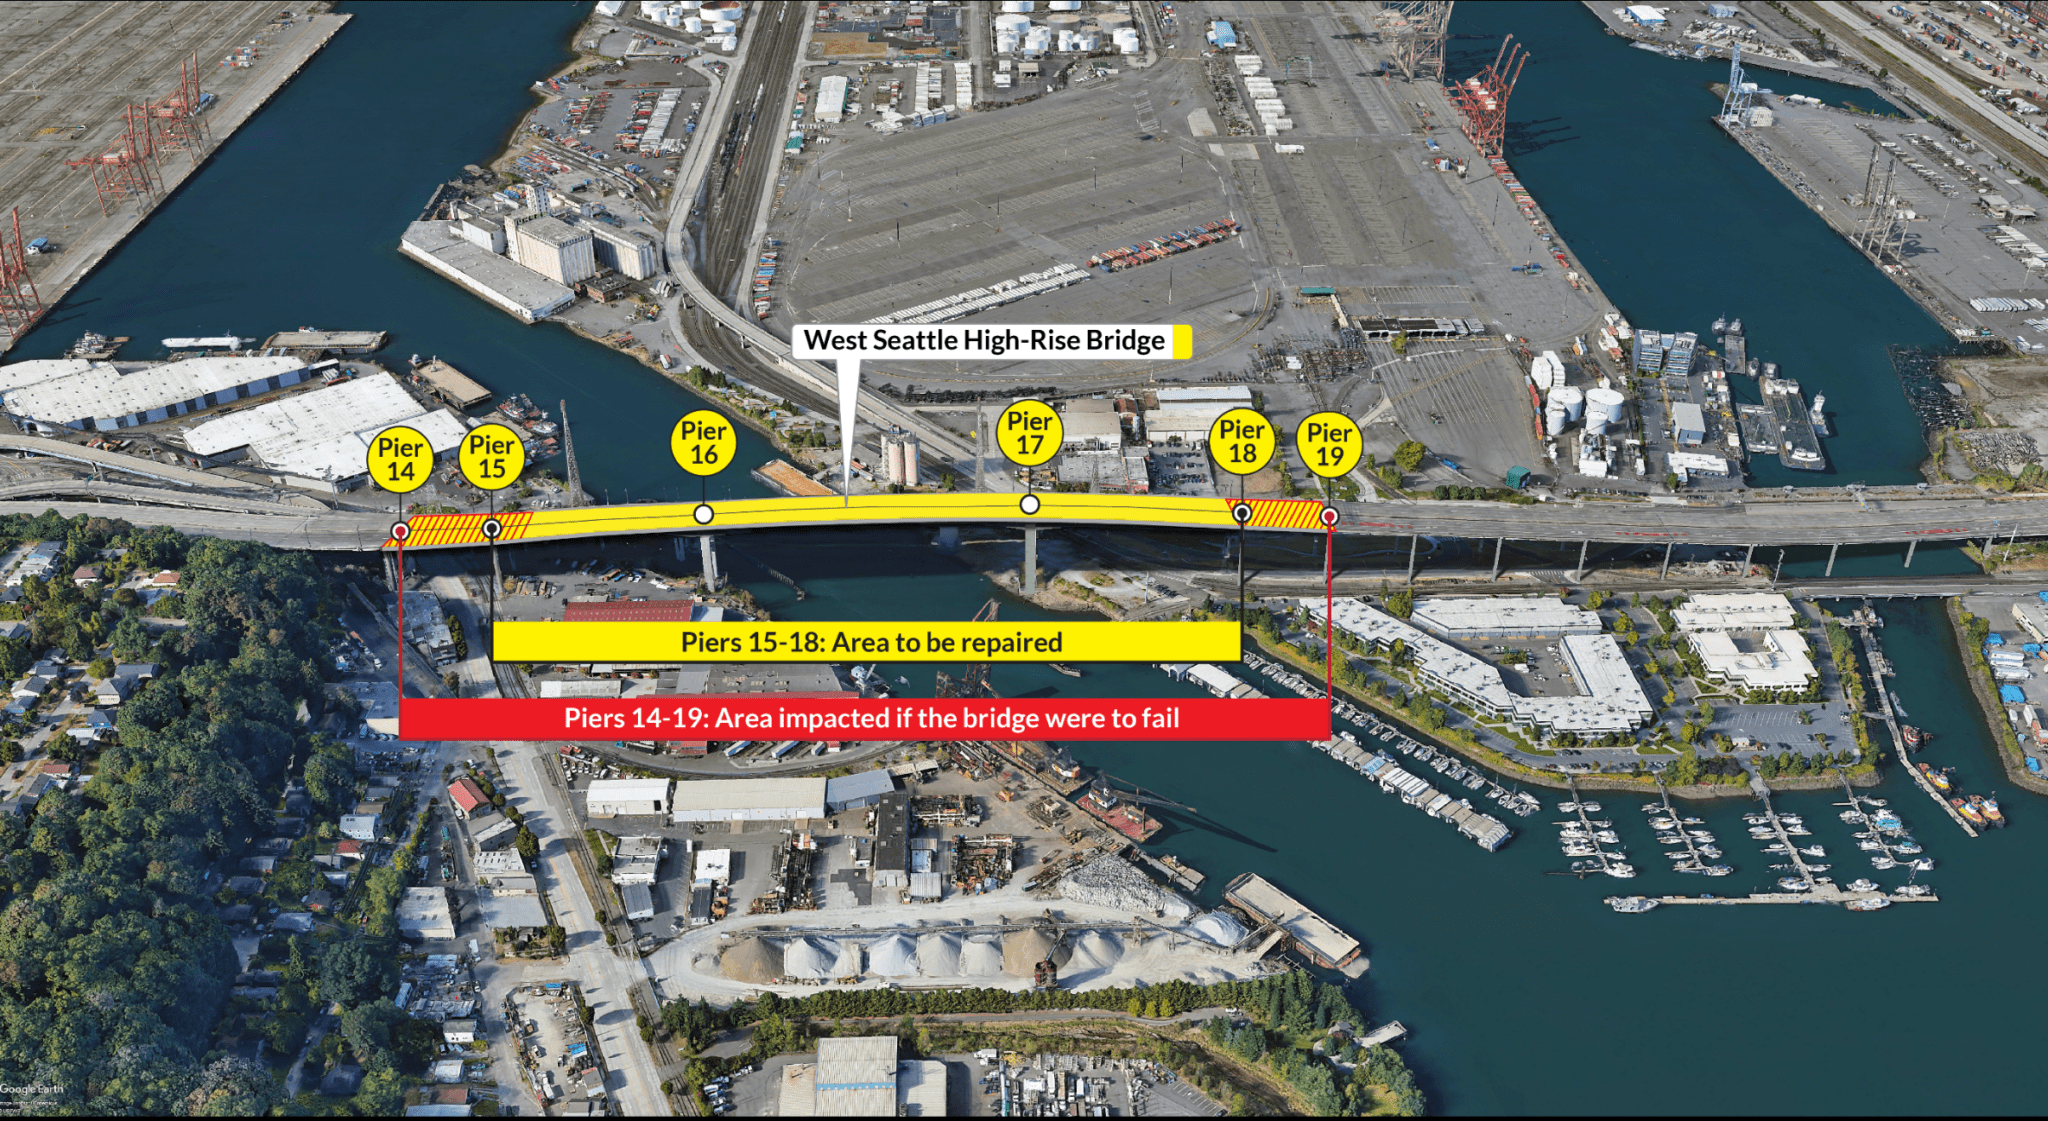 A diagram showing which areas of the West Seattle Bridge need to be repaired  which areas would be impacted on the bridge if it were to fail.